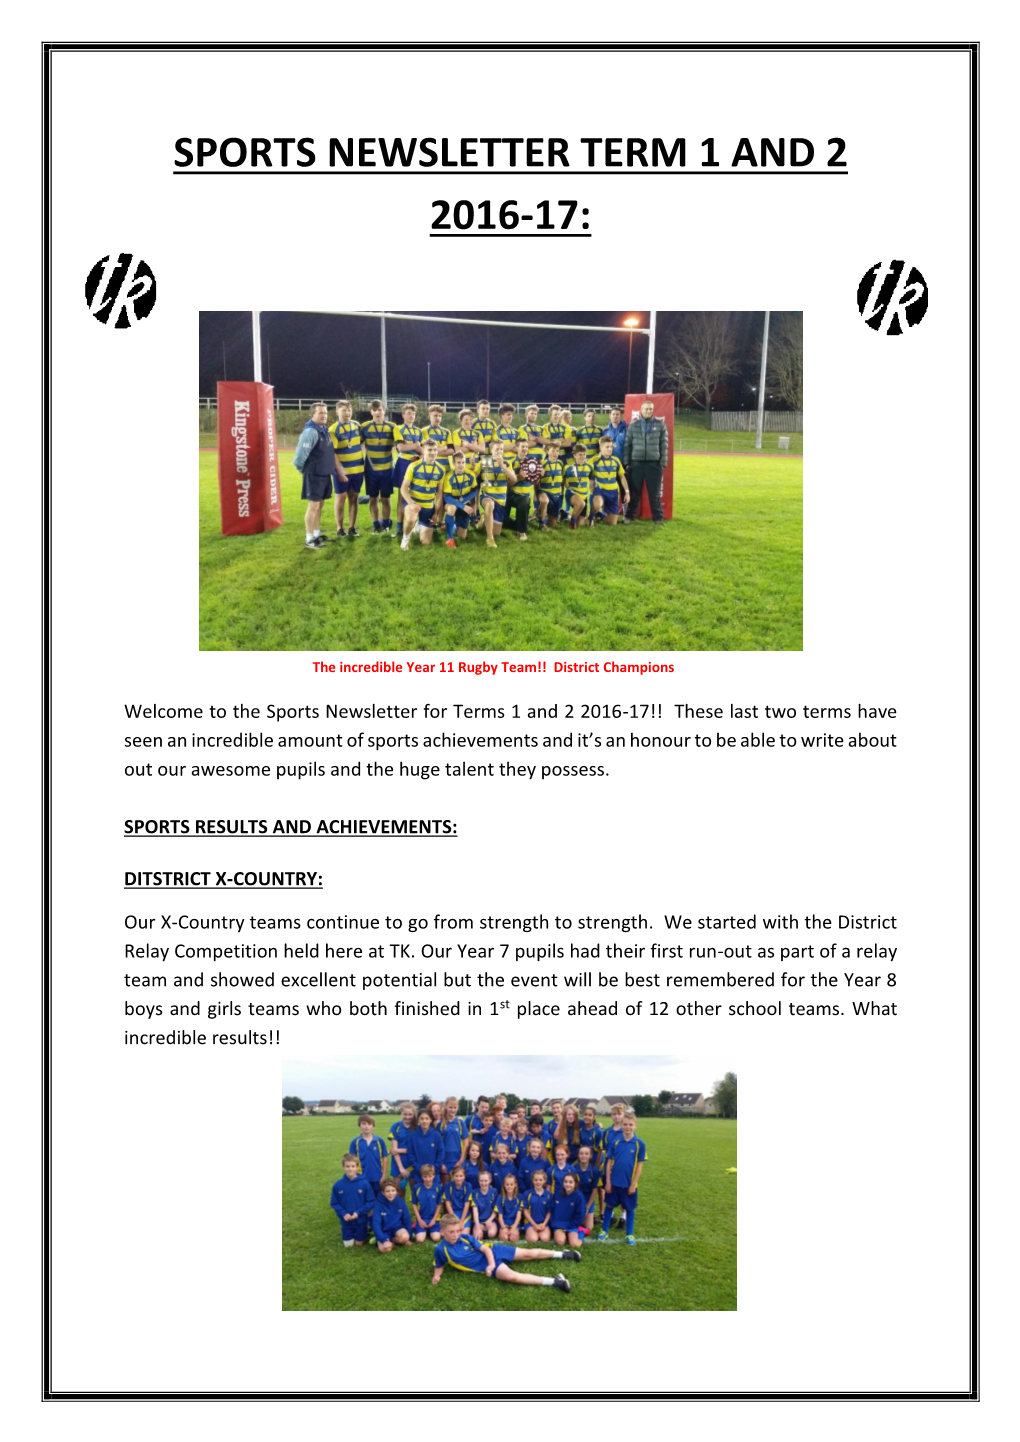 Sports Newsletter Term 1 and 2 2016-17